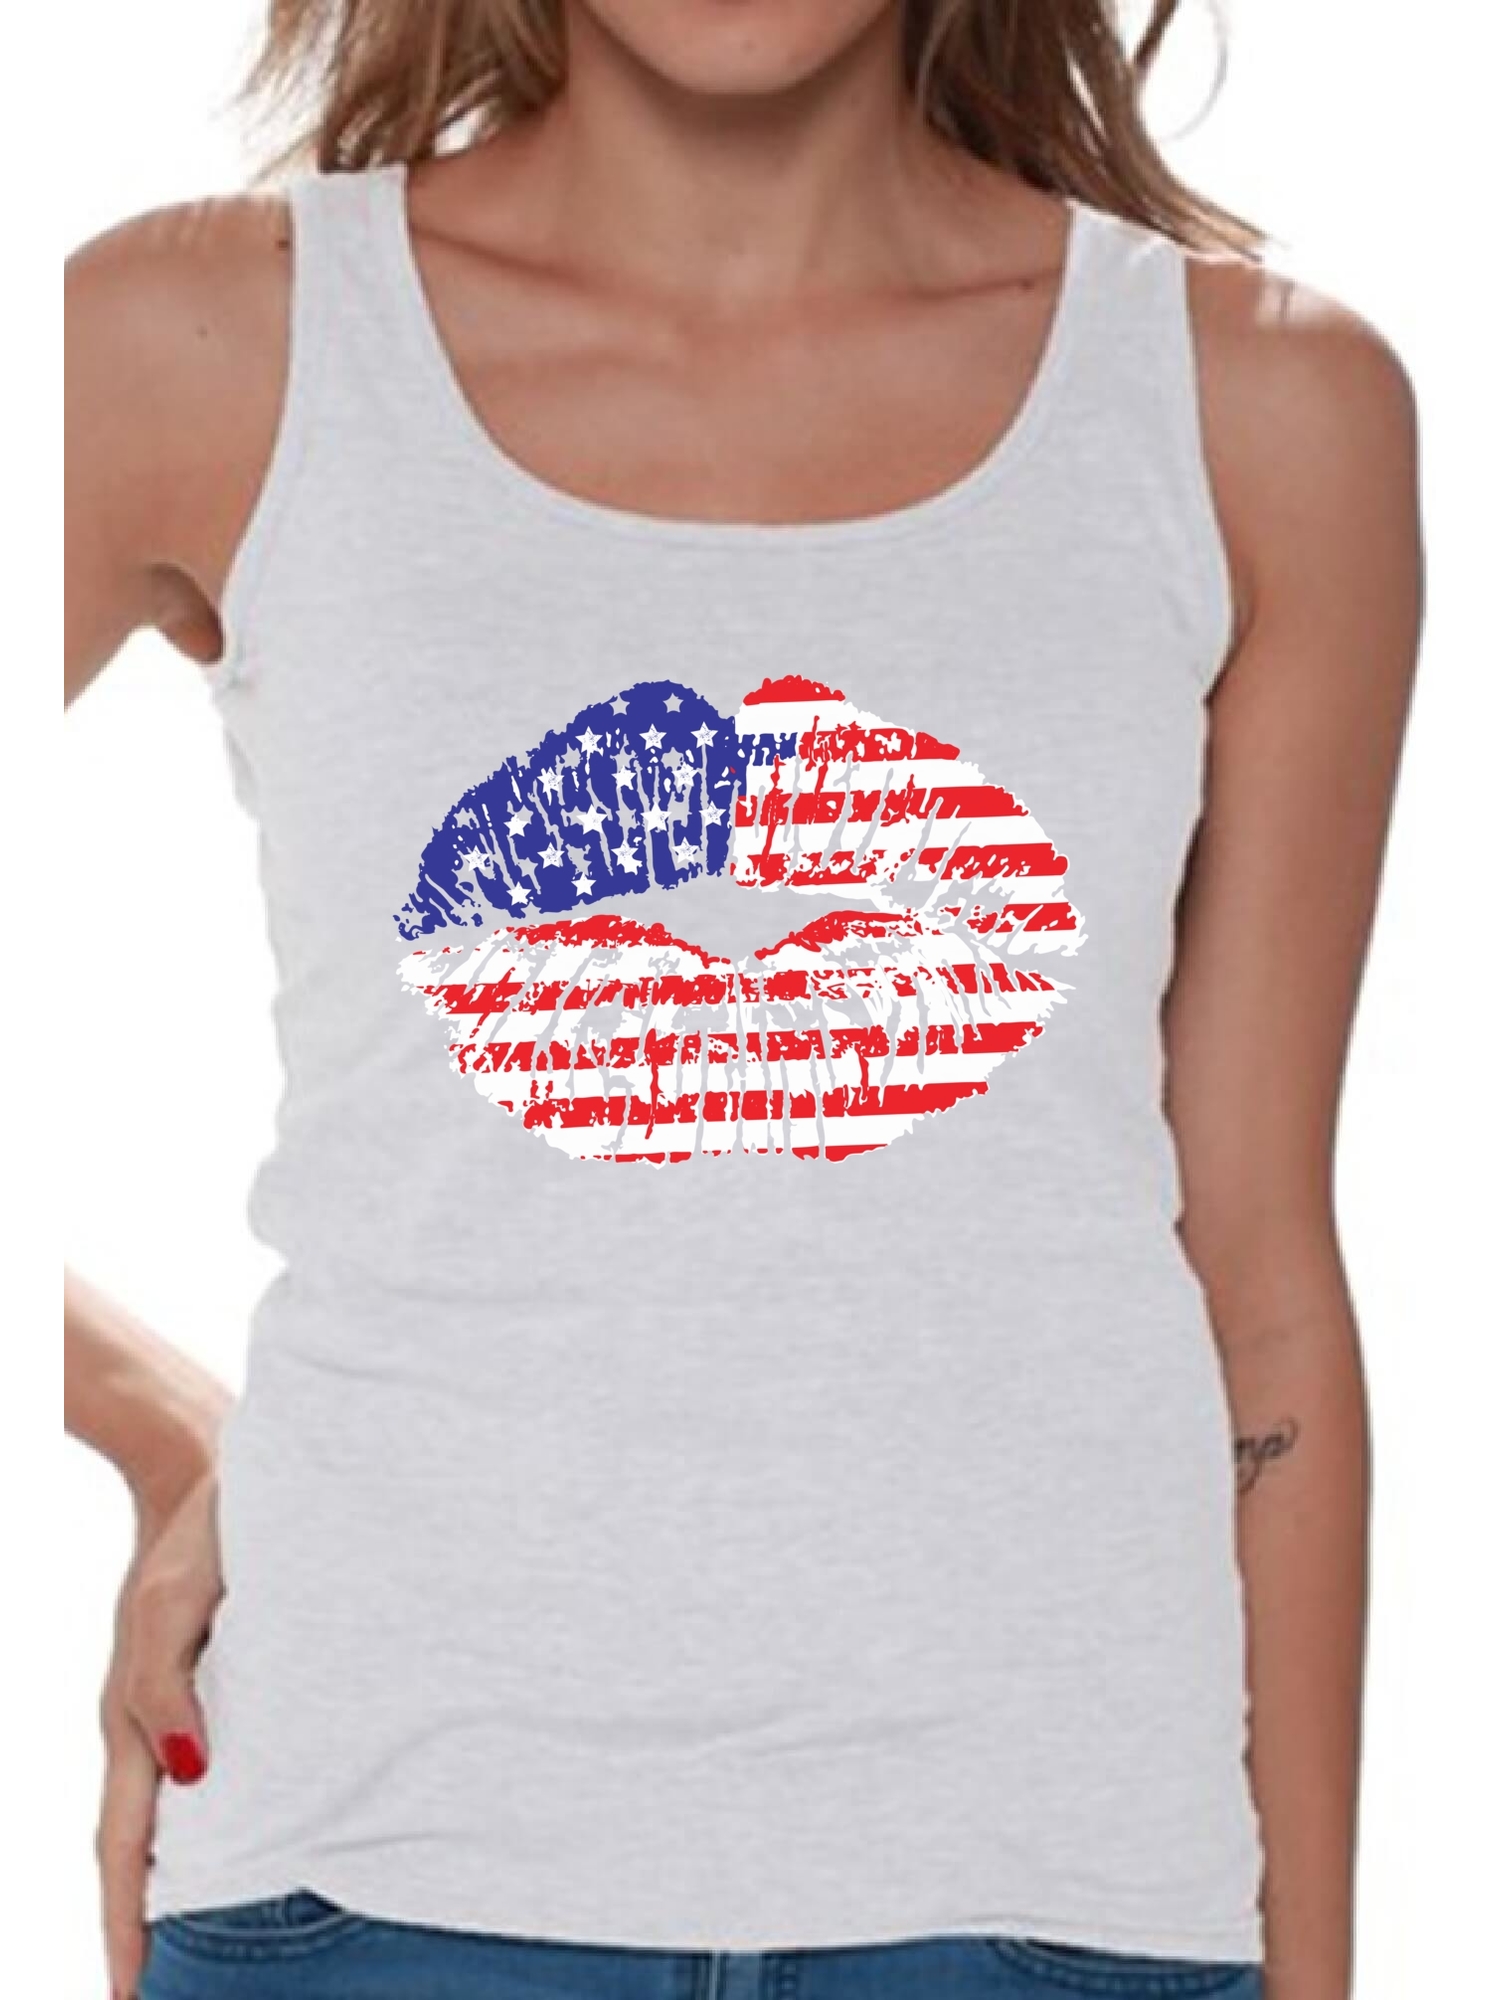 Awkward Styles American Flag Tank Tops Lips Tank Tank for Women USA Flag Stars and Stripes Lips Women's Tops Red White & Blue Lips Tank Top 4th of July Gift Independence Day Party Outfit for Her - image 1 of 4